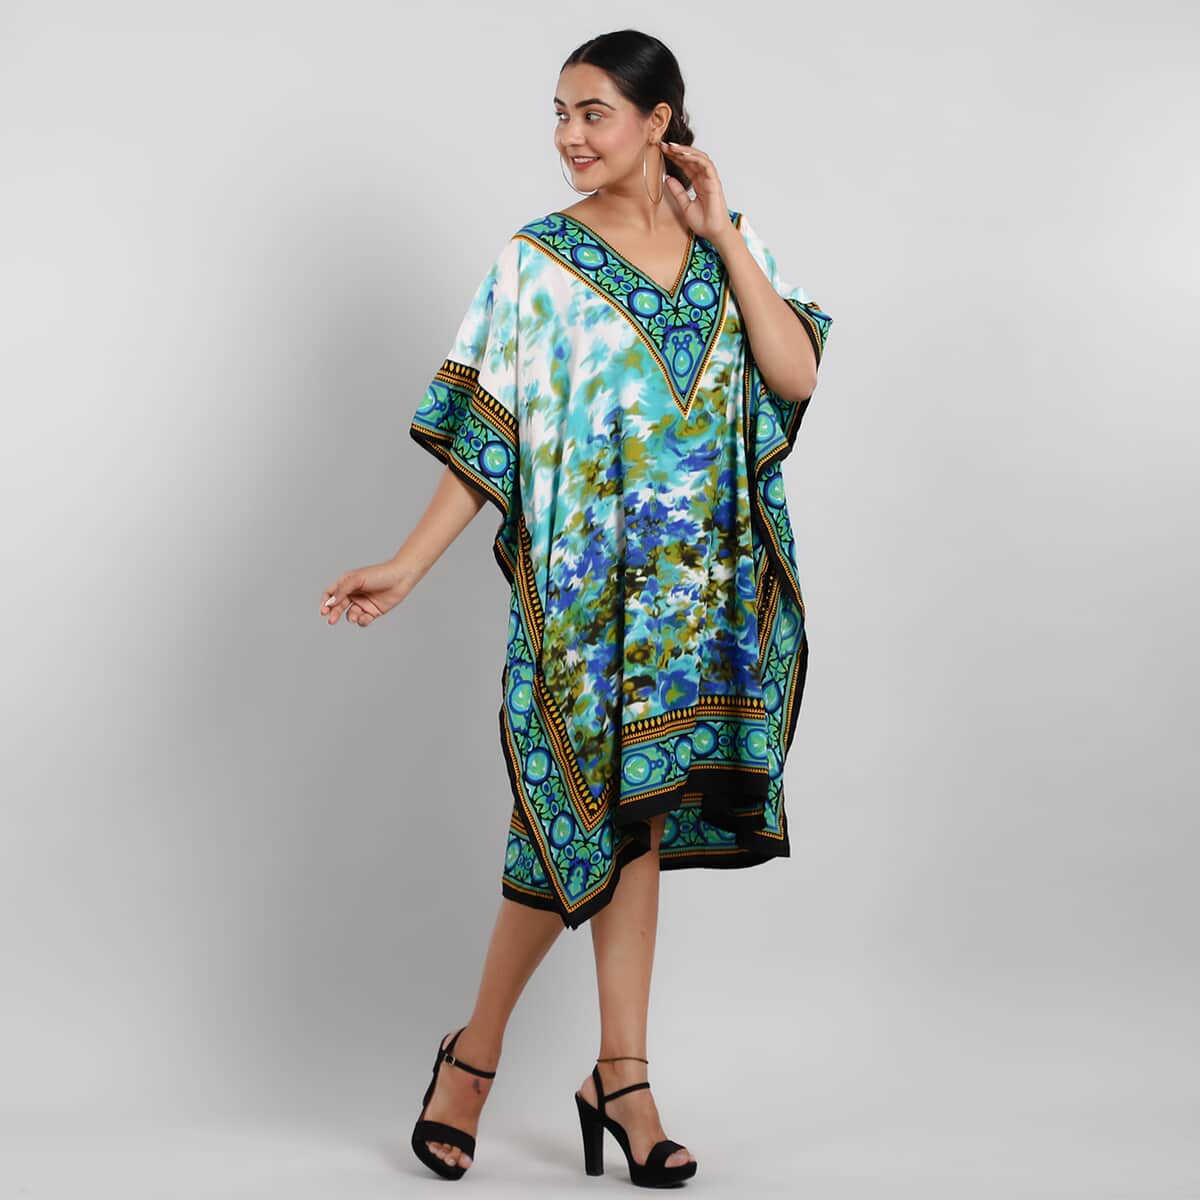 TAMSY Blue Floral Screen Printed Mid Short Kaftan - One Size Fits Most (36"x41") image number 3